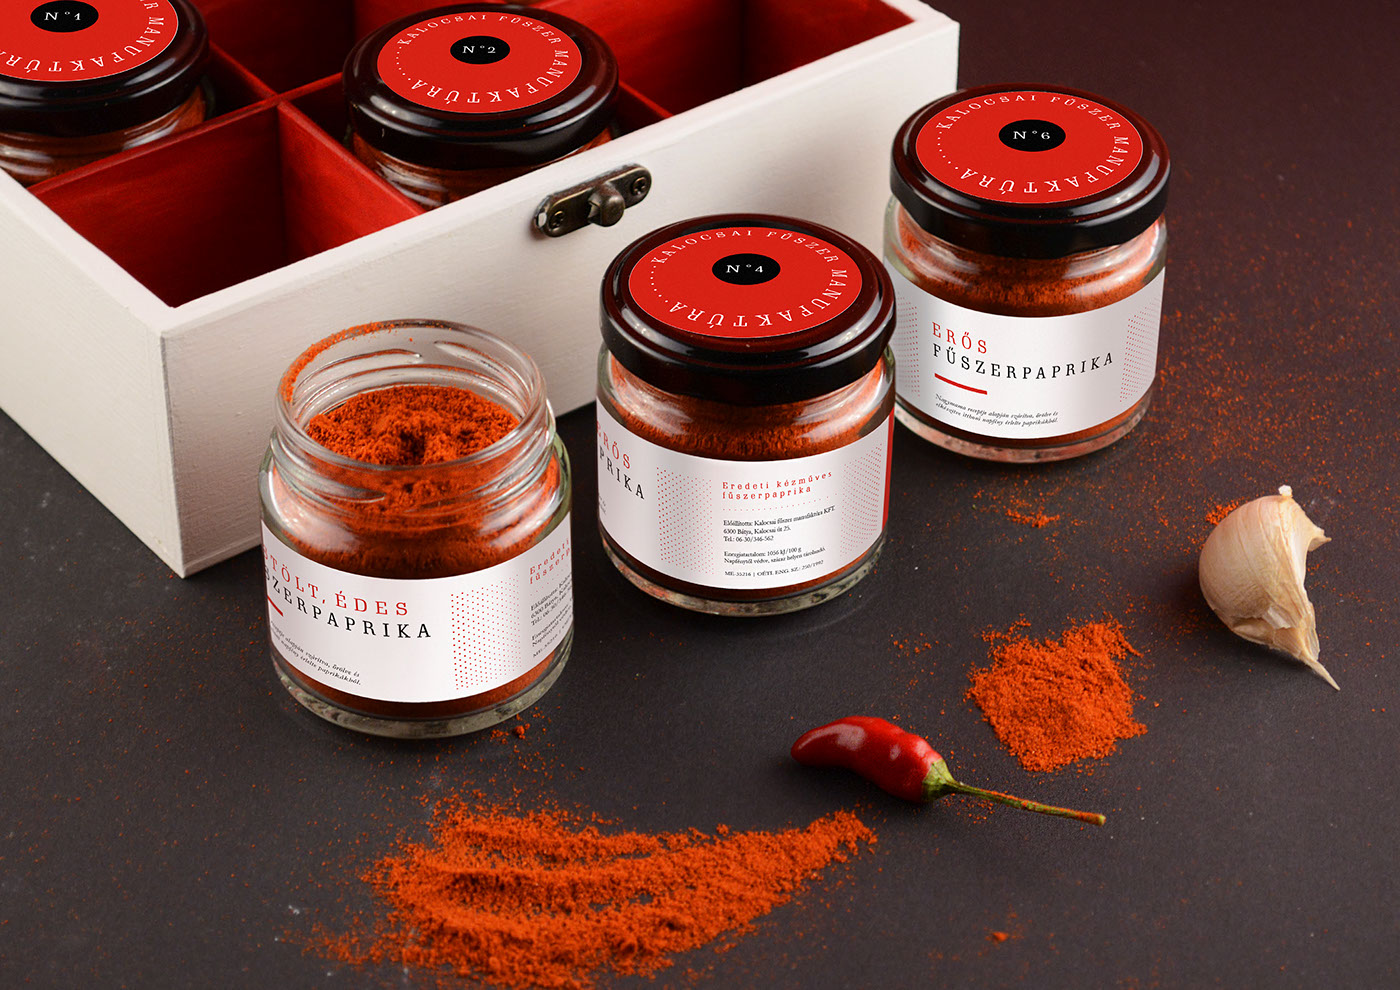 package design  branding  Photography  spice manufacture traditional product traditional recipies pepper chili spices handmade product